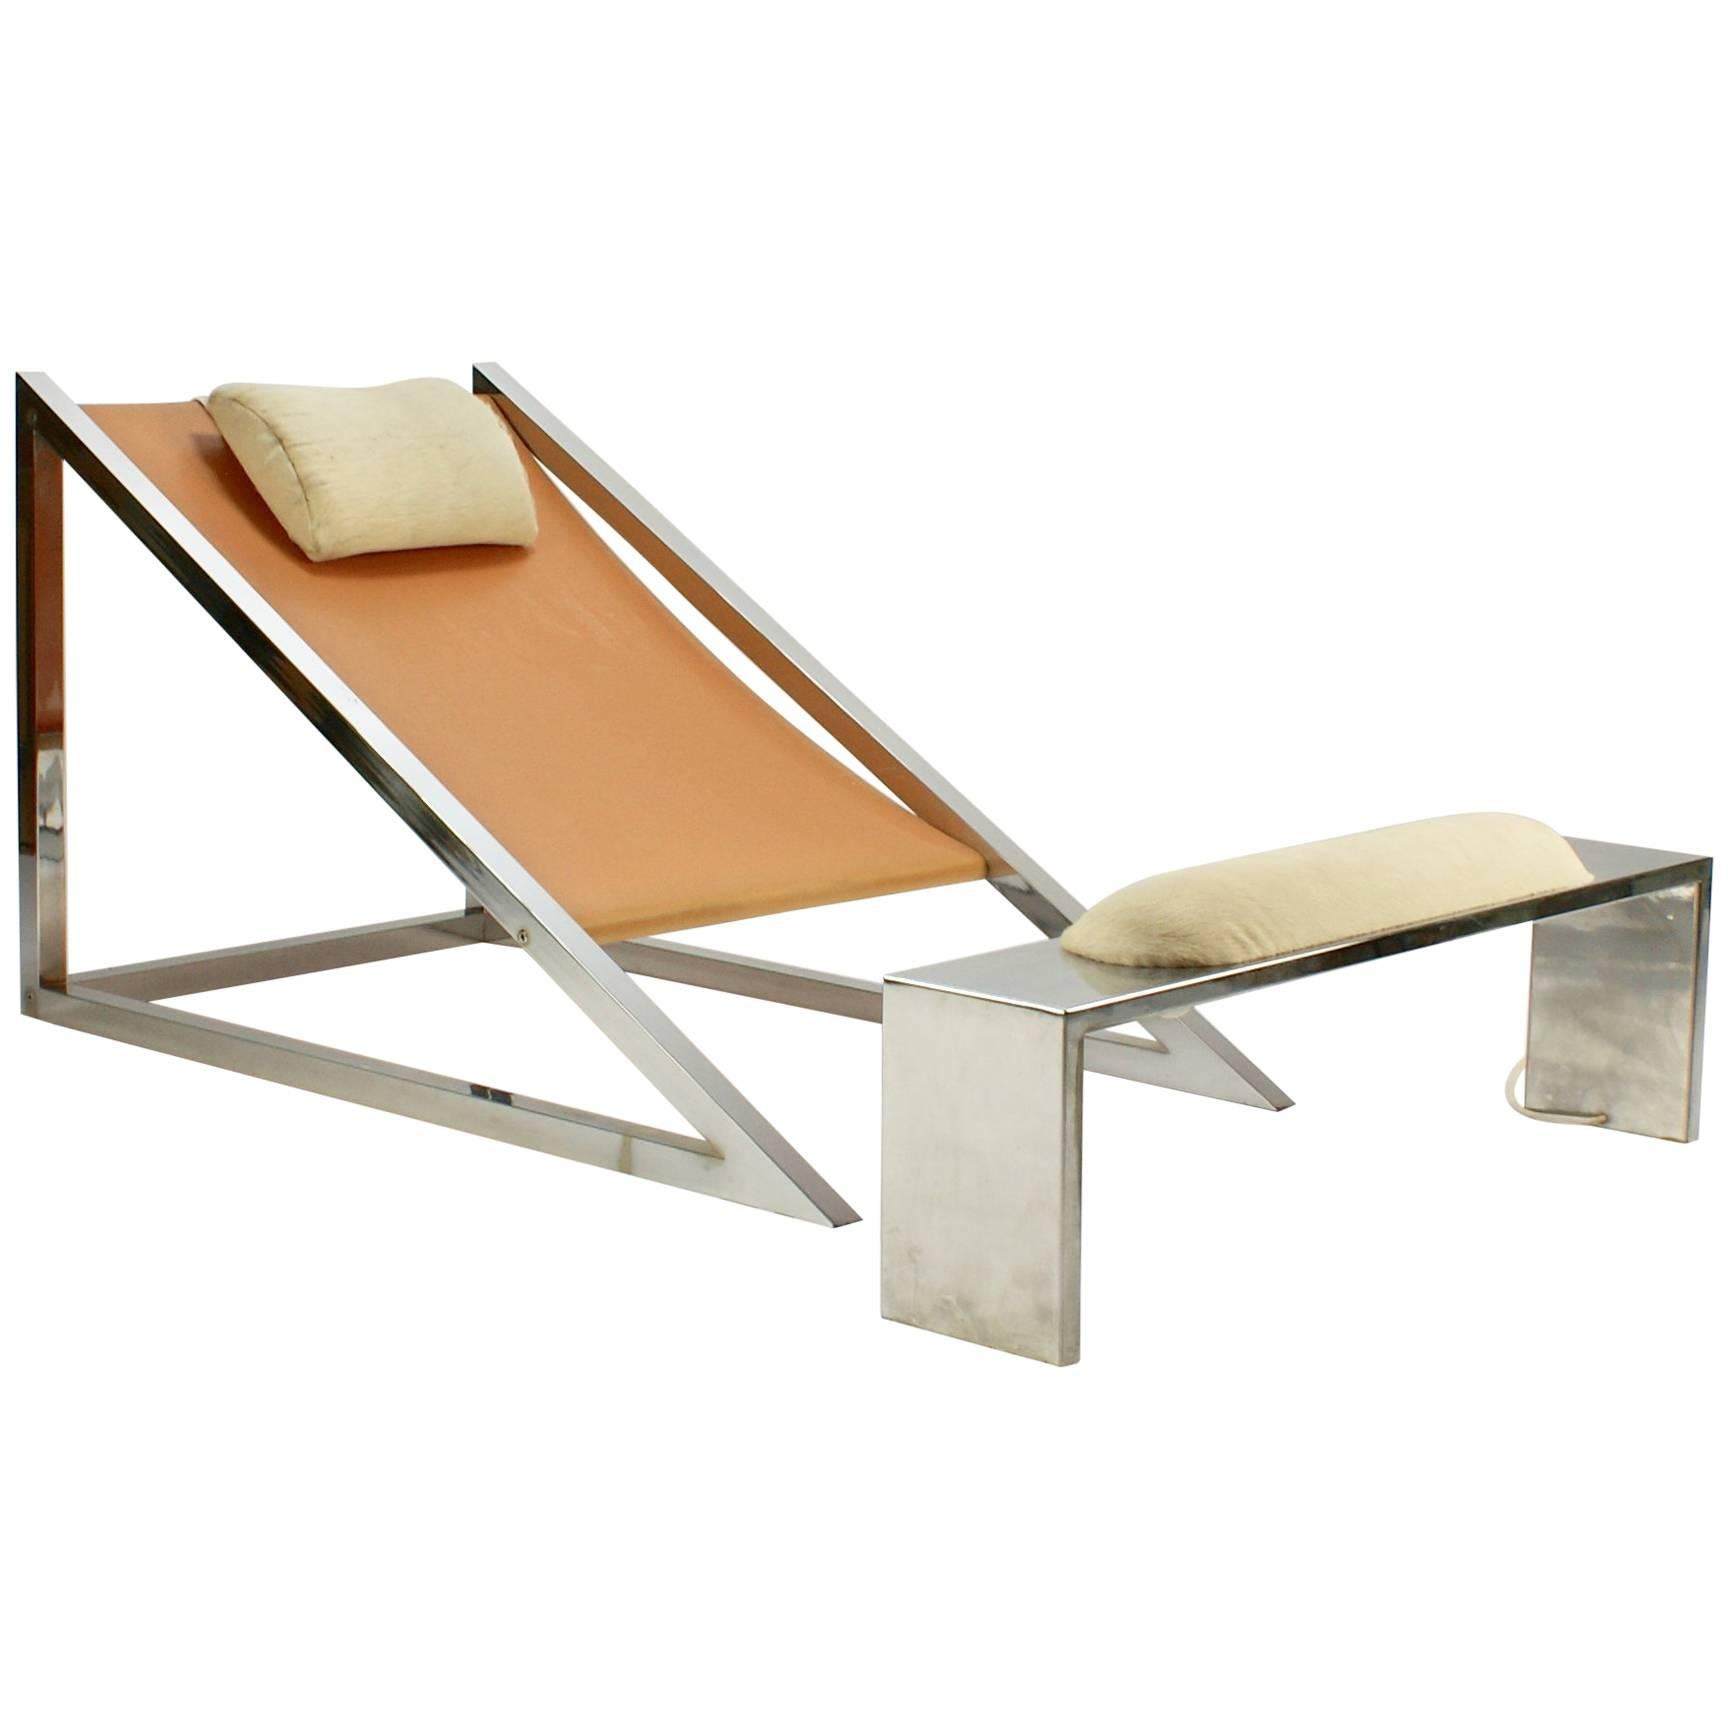 Mies Chair and Ottoman, Archizoom Associati, 1969 For Sale